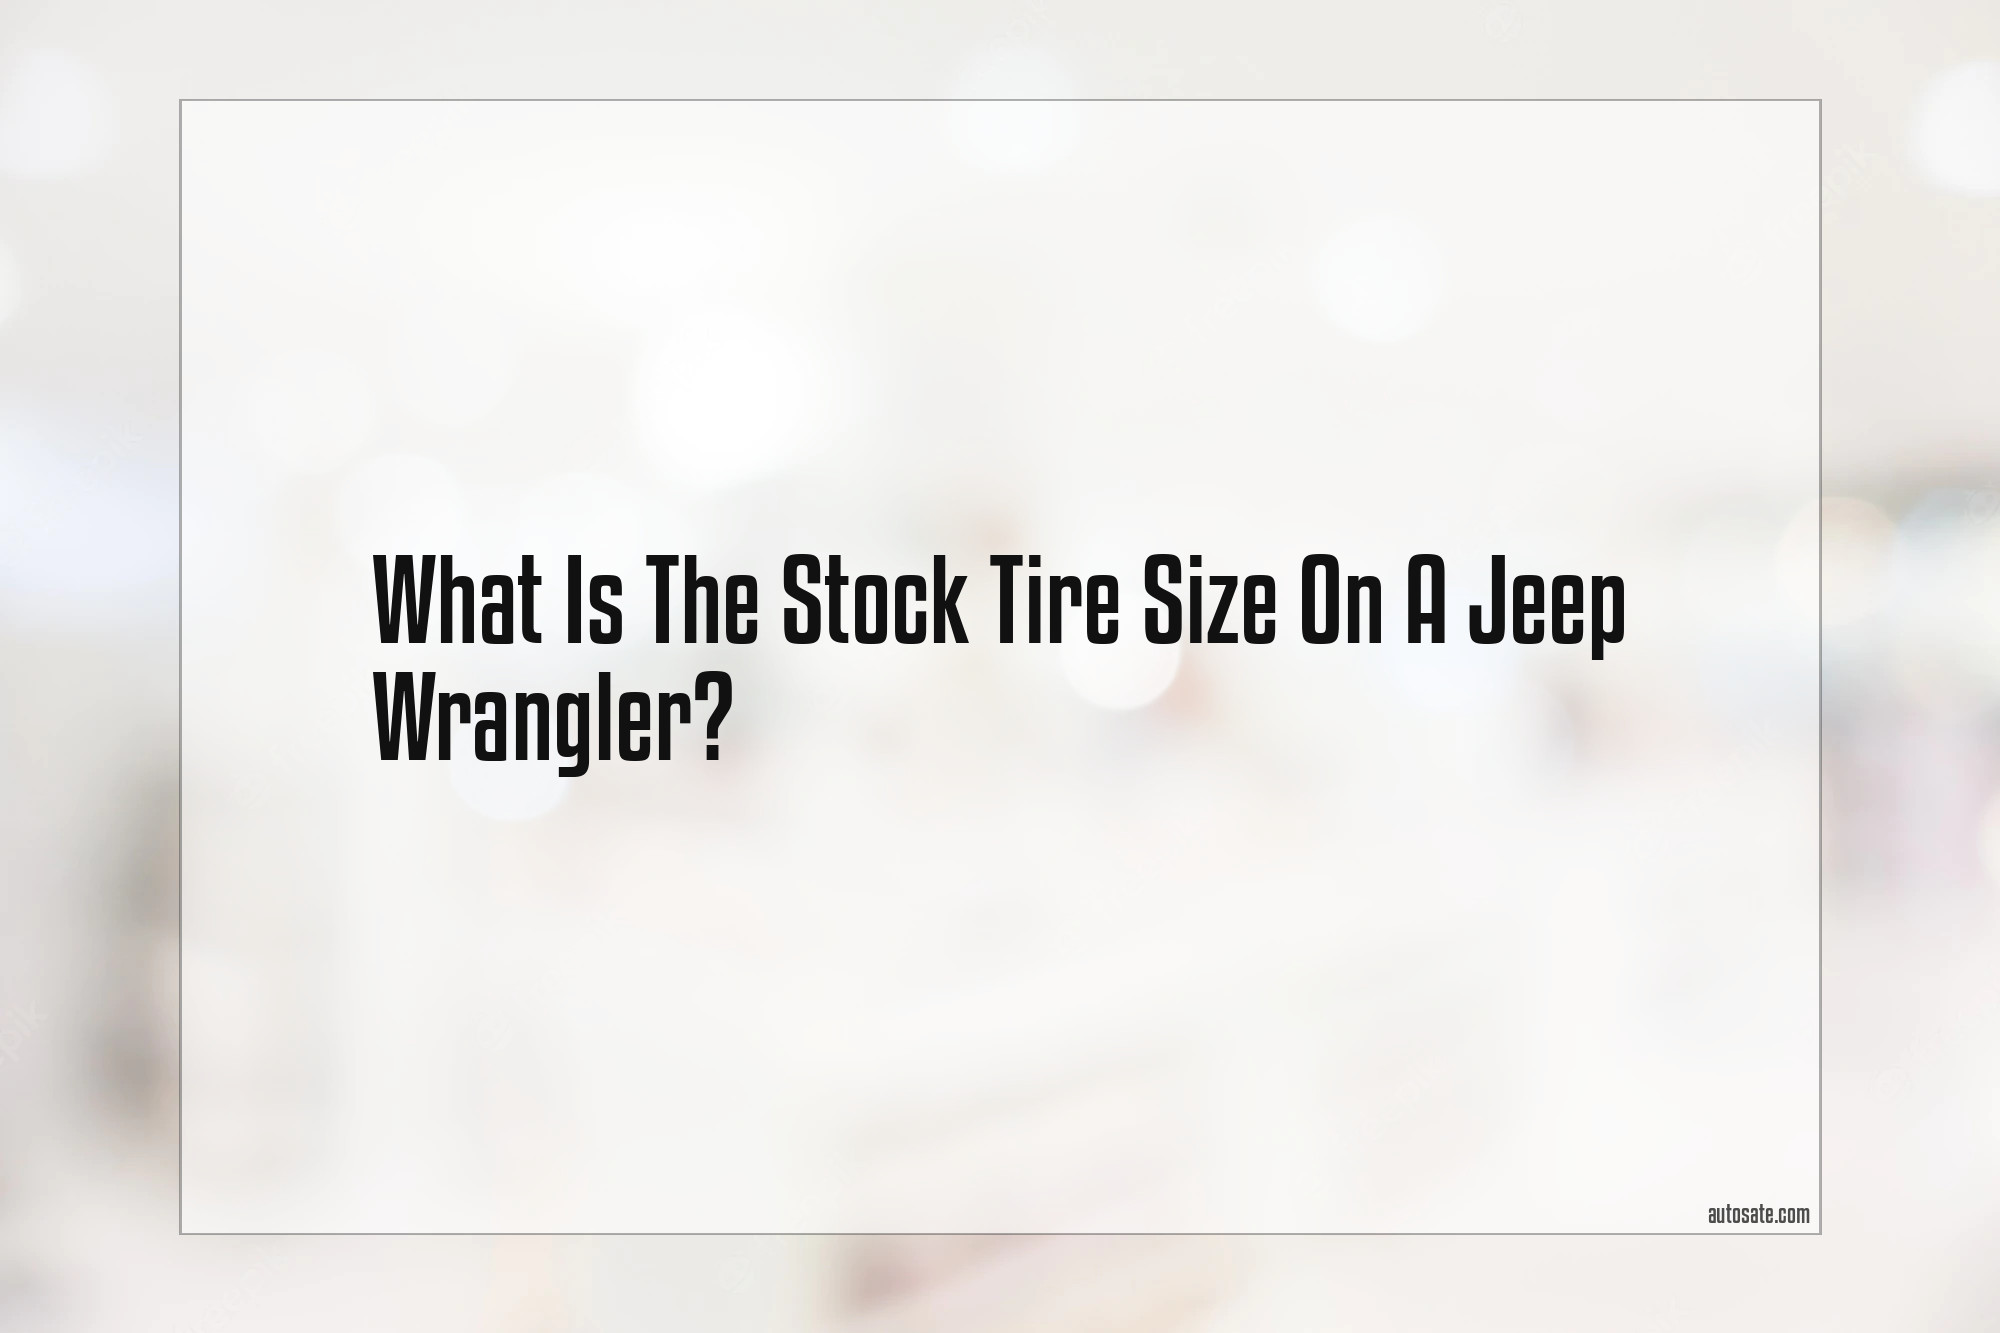 What Is The Stock Tire Size On A Jeep Wrangler